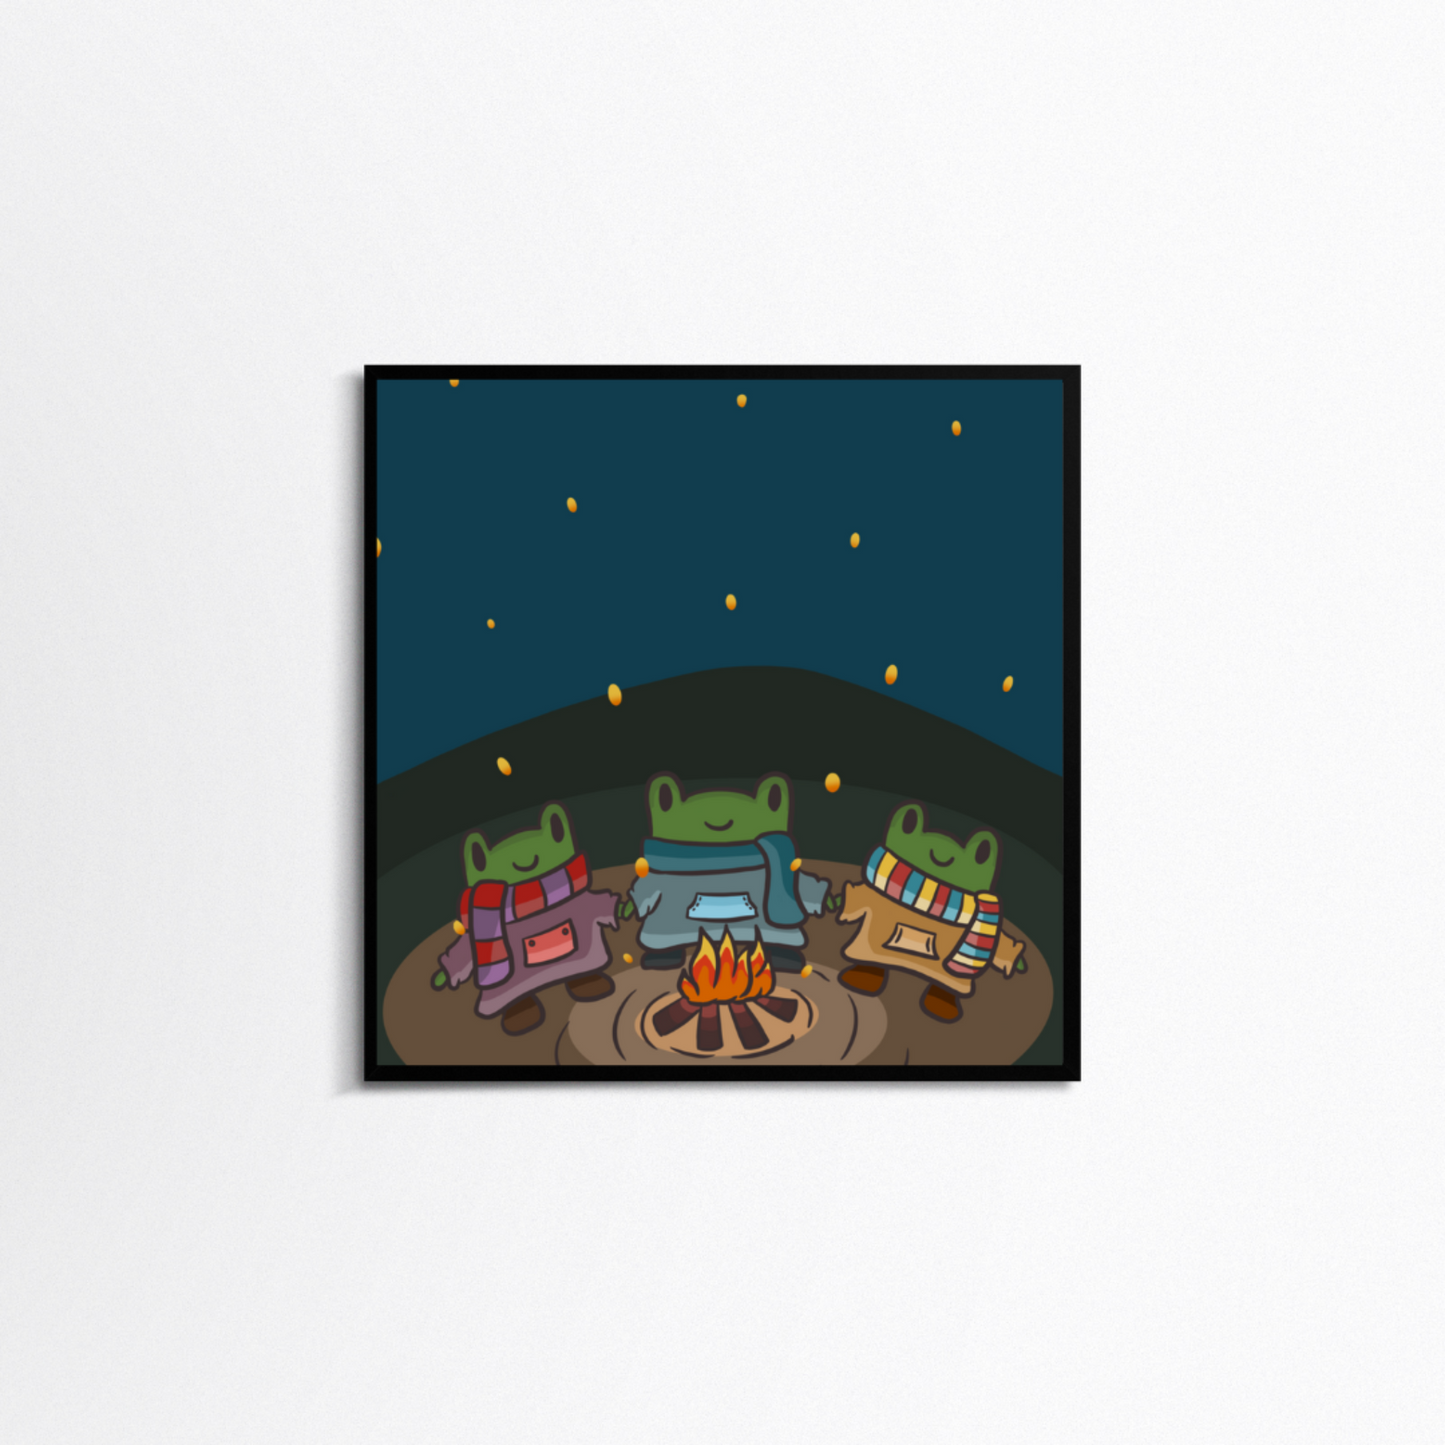 White background with a square black frame. In the frame is a print with a dark blue sky and green and brown forefront. There are three cartoon frogs smiling holding hands in sweaters and scarves around a fire.